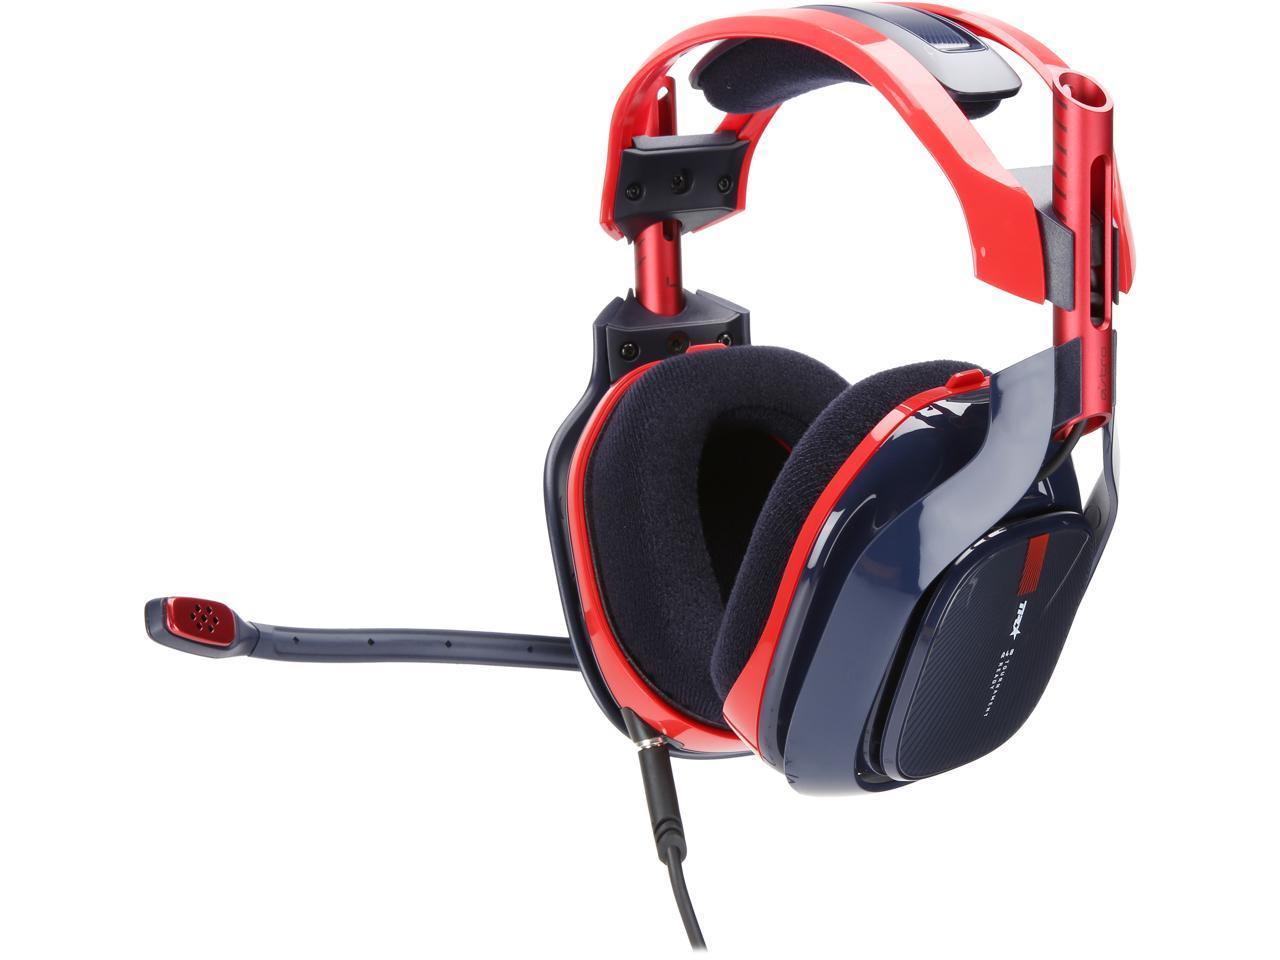 Astro a40 Tr for playstston and pc lagoagrio.gob.ec